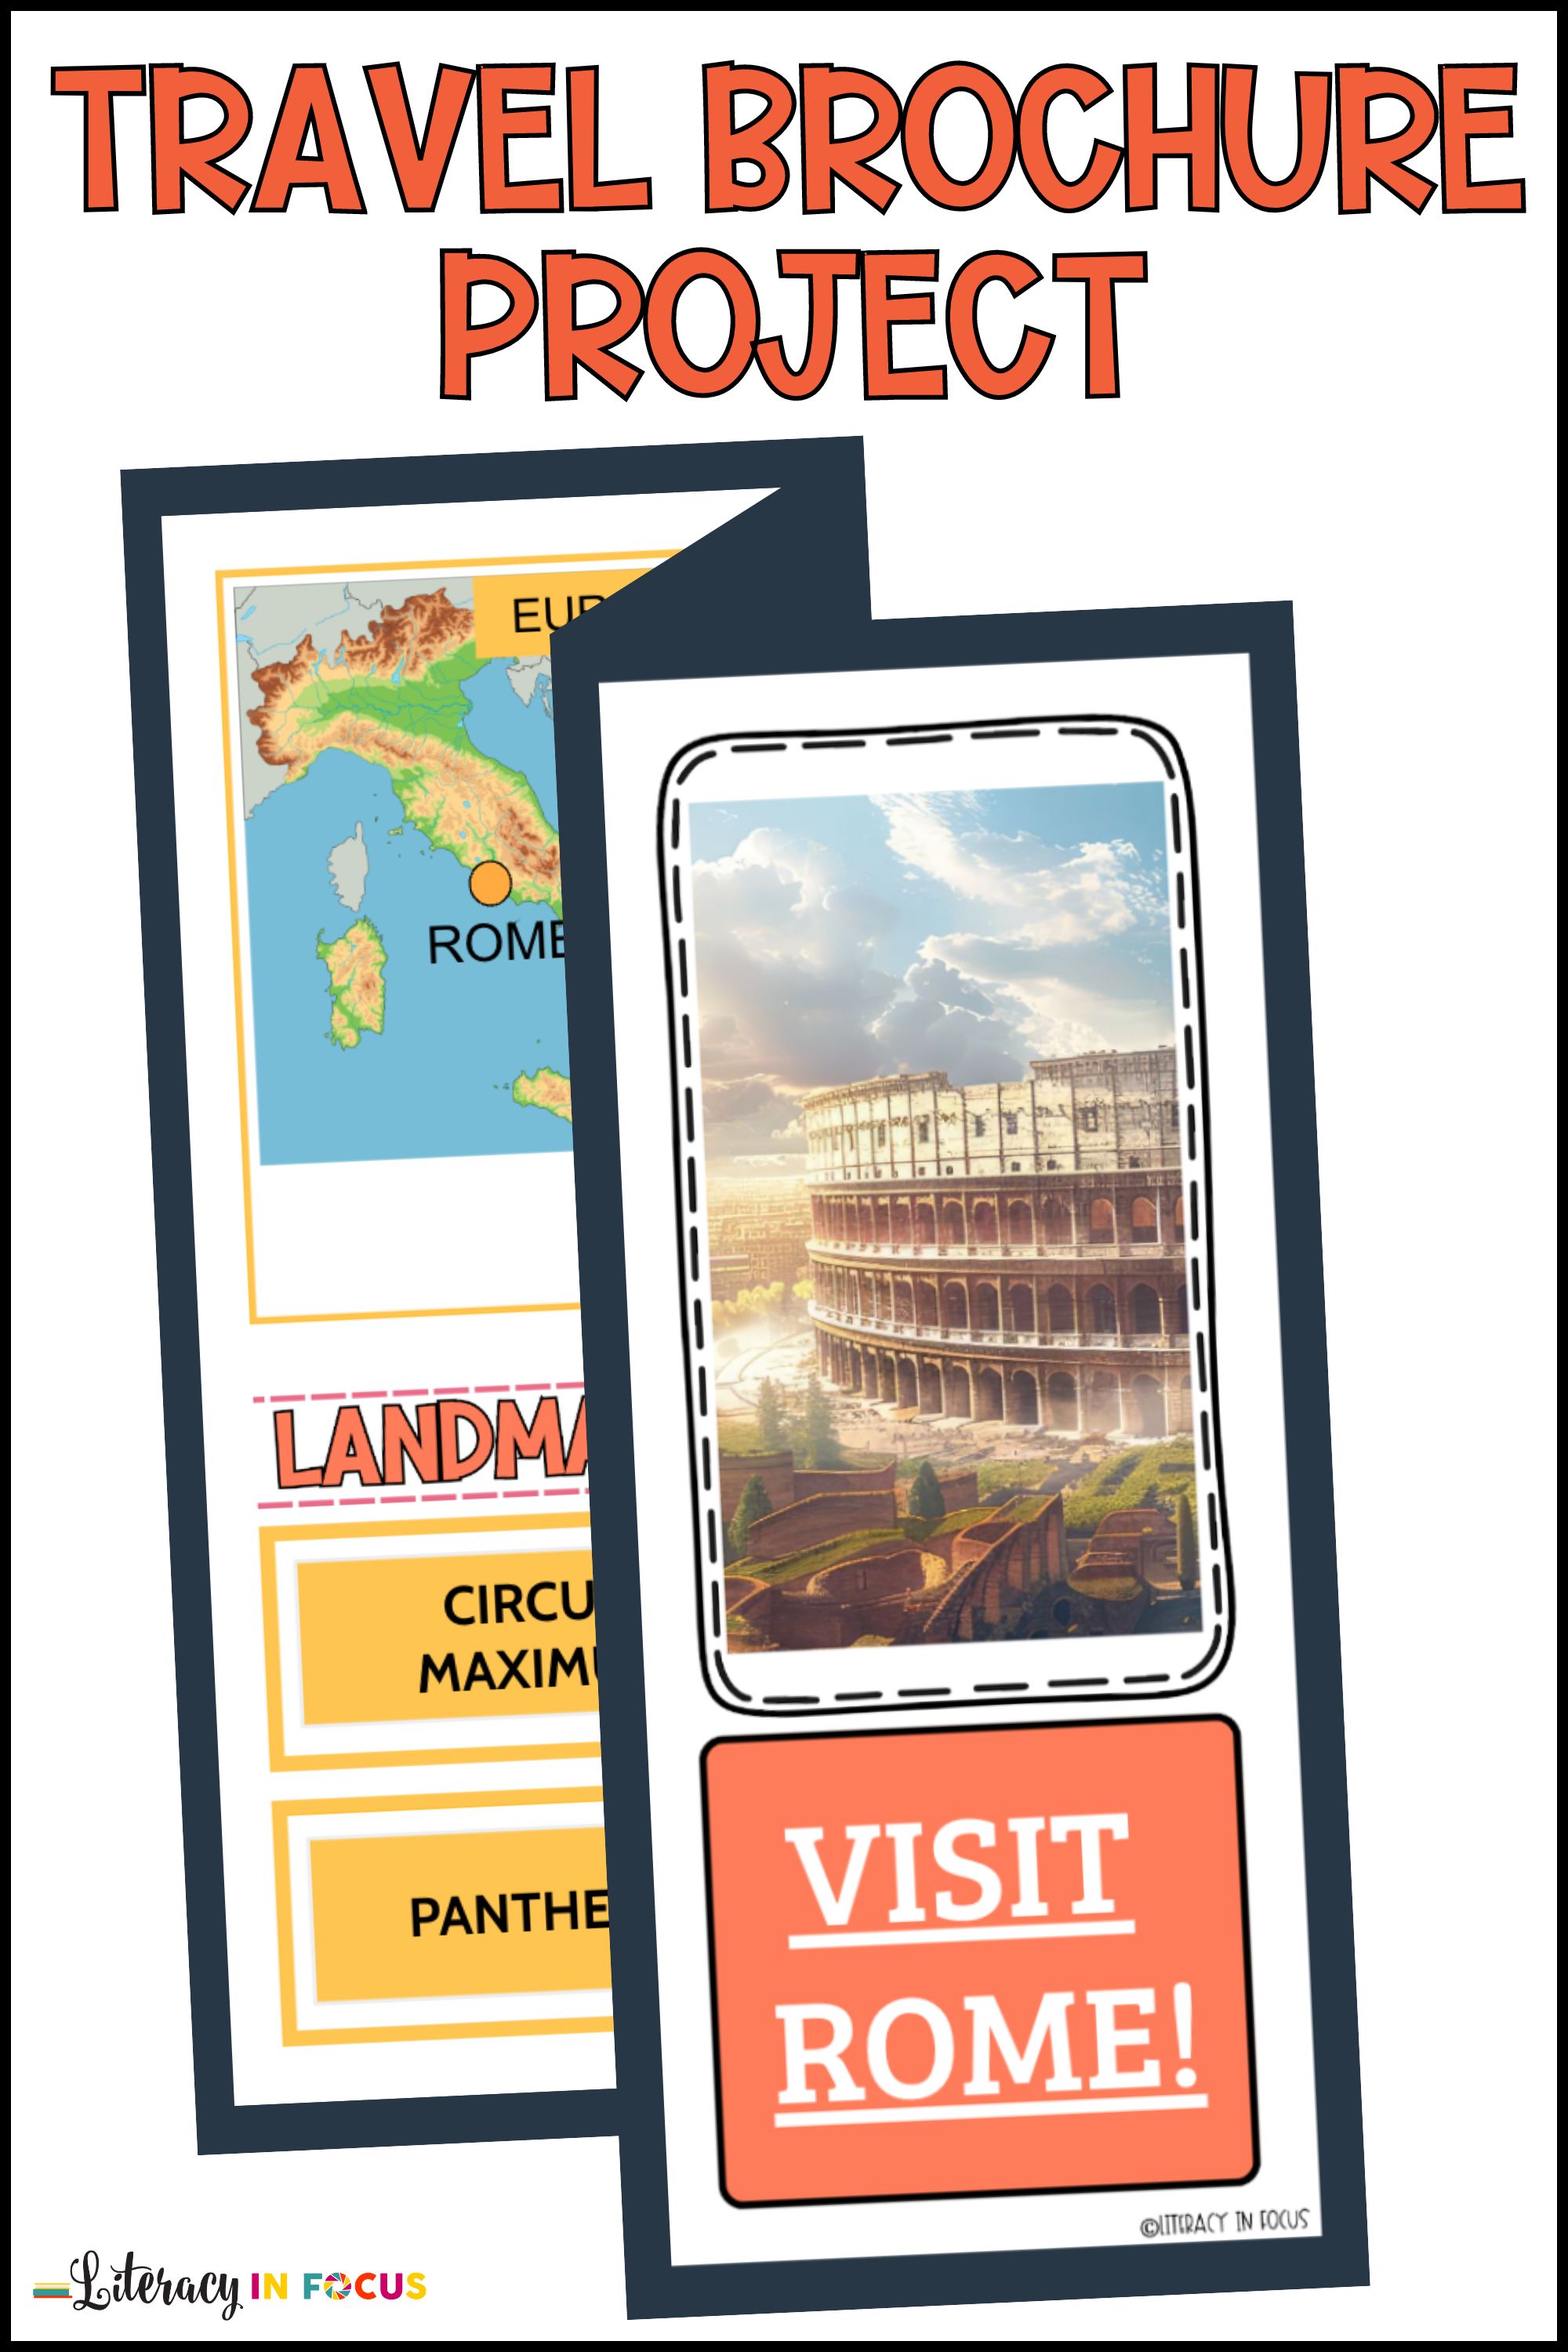 Travel Brochure Template and Research Project